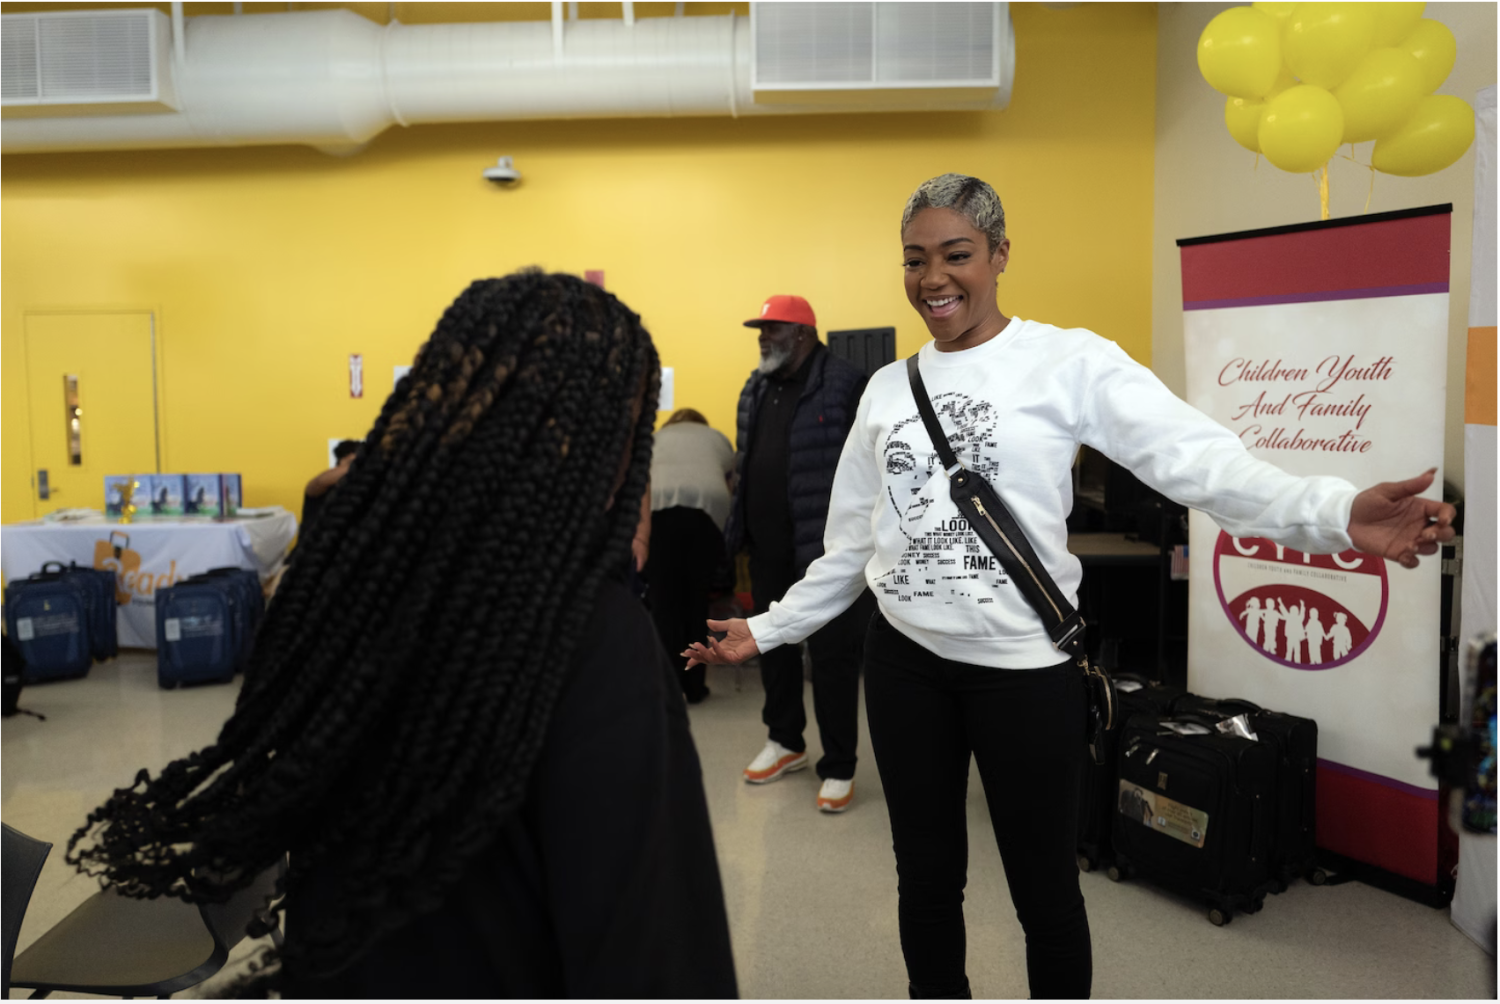 Haddish greets a student of Crenshaw High School in Los Angeles at an event sponsored by her She Ready Foundation and Children Youth and Family Collaborative. (Zaydee Sanchez for The Washington Post)